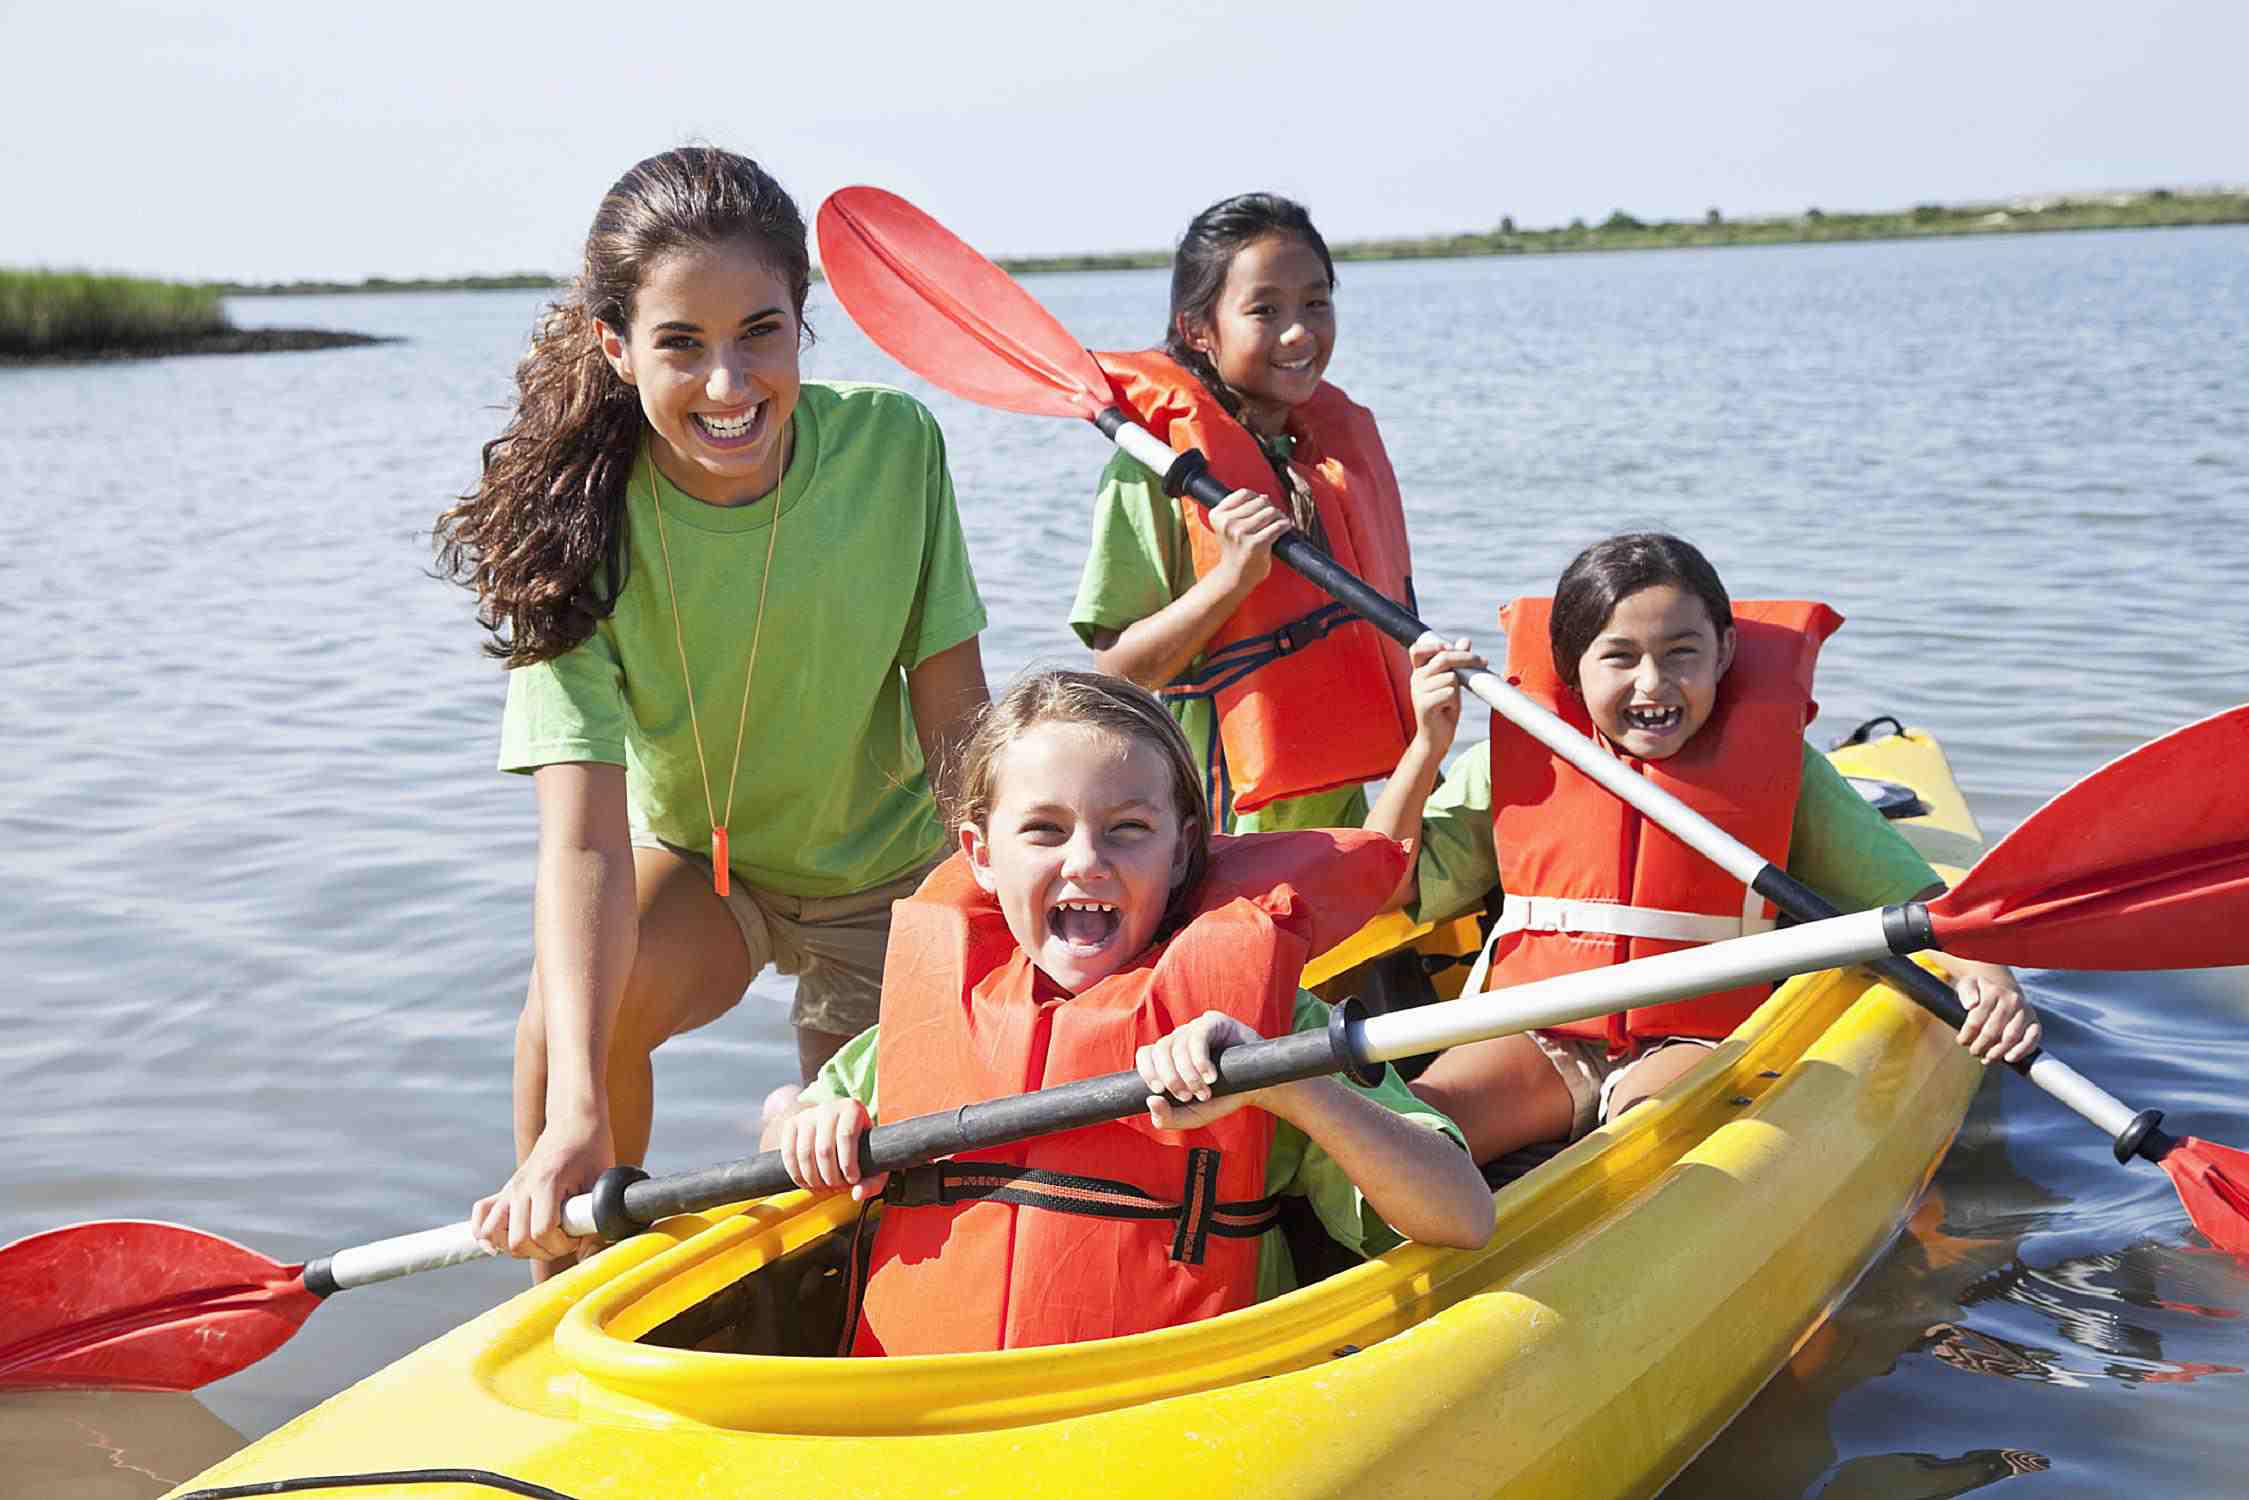 I Bet You Can’t Spend a Day as a 🏕️ Camp Counselor Without Getting Fired Kids Summer Camp Canoeing Sports